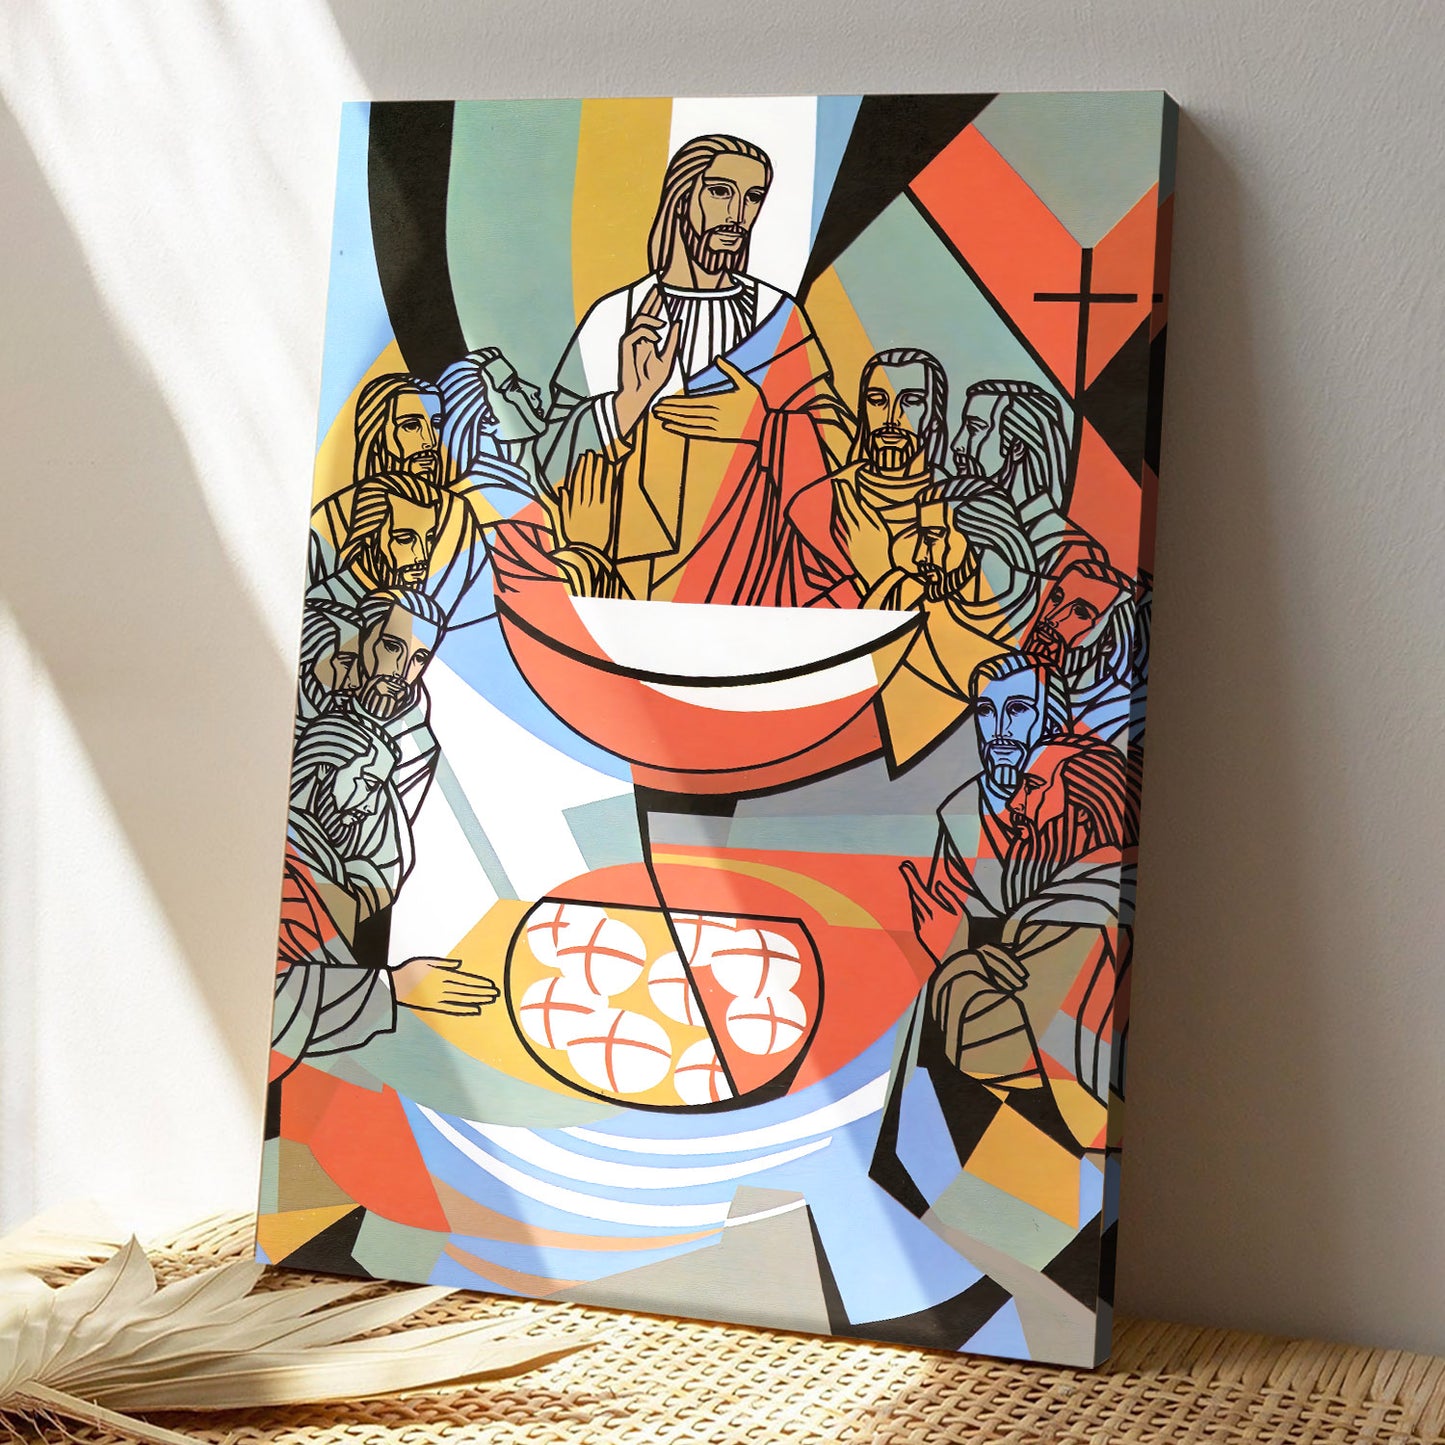 The Last Supper - Jesus Painting On Canvas - Religious Posters - Christian Canvas Prints - Religious Wall Art Canvas - Ciaocustom